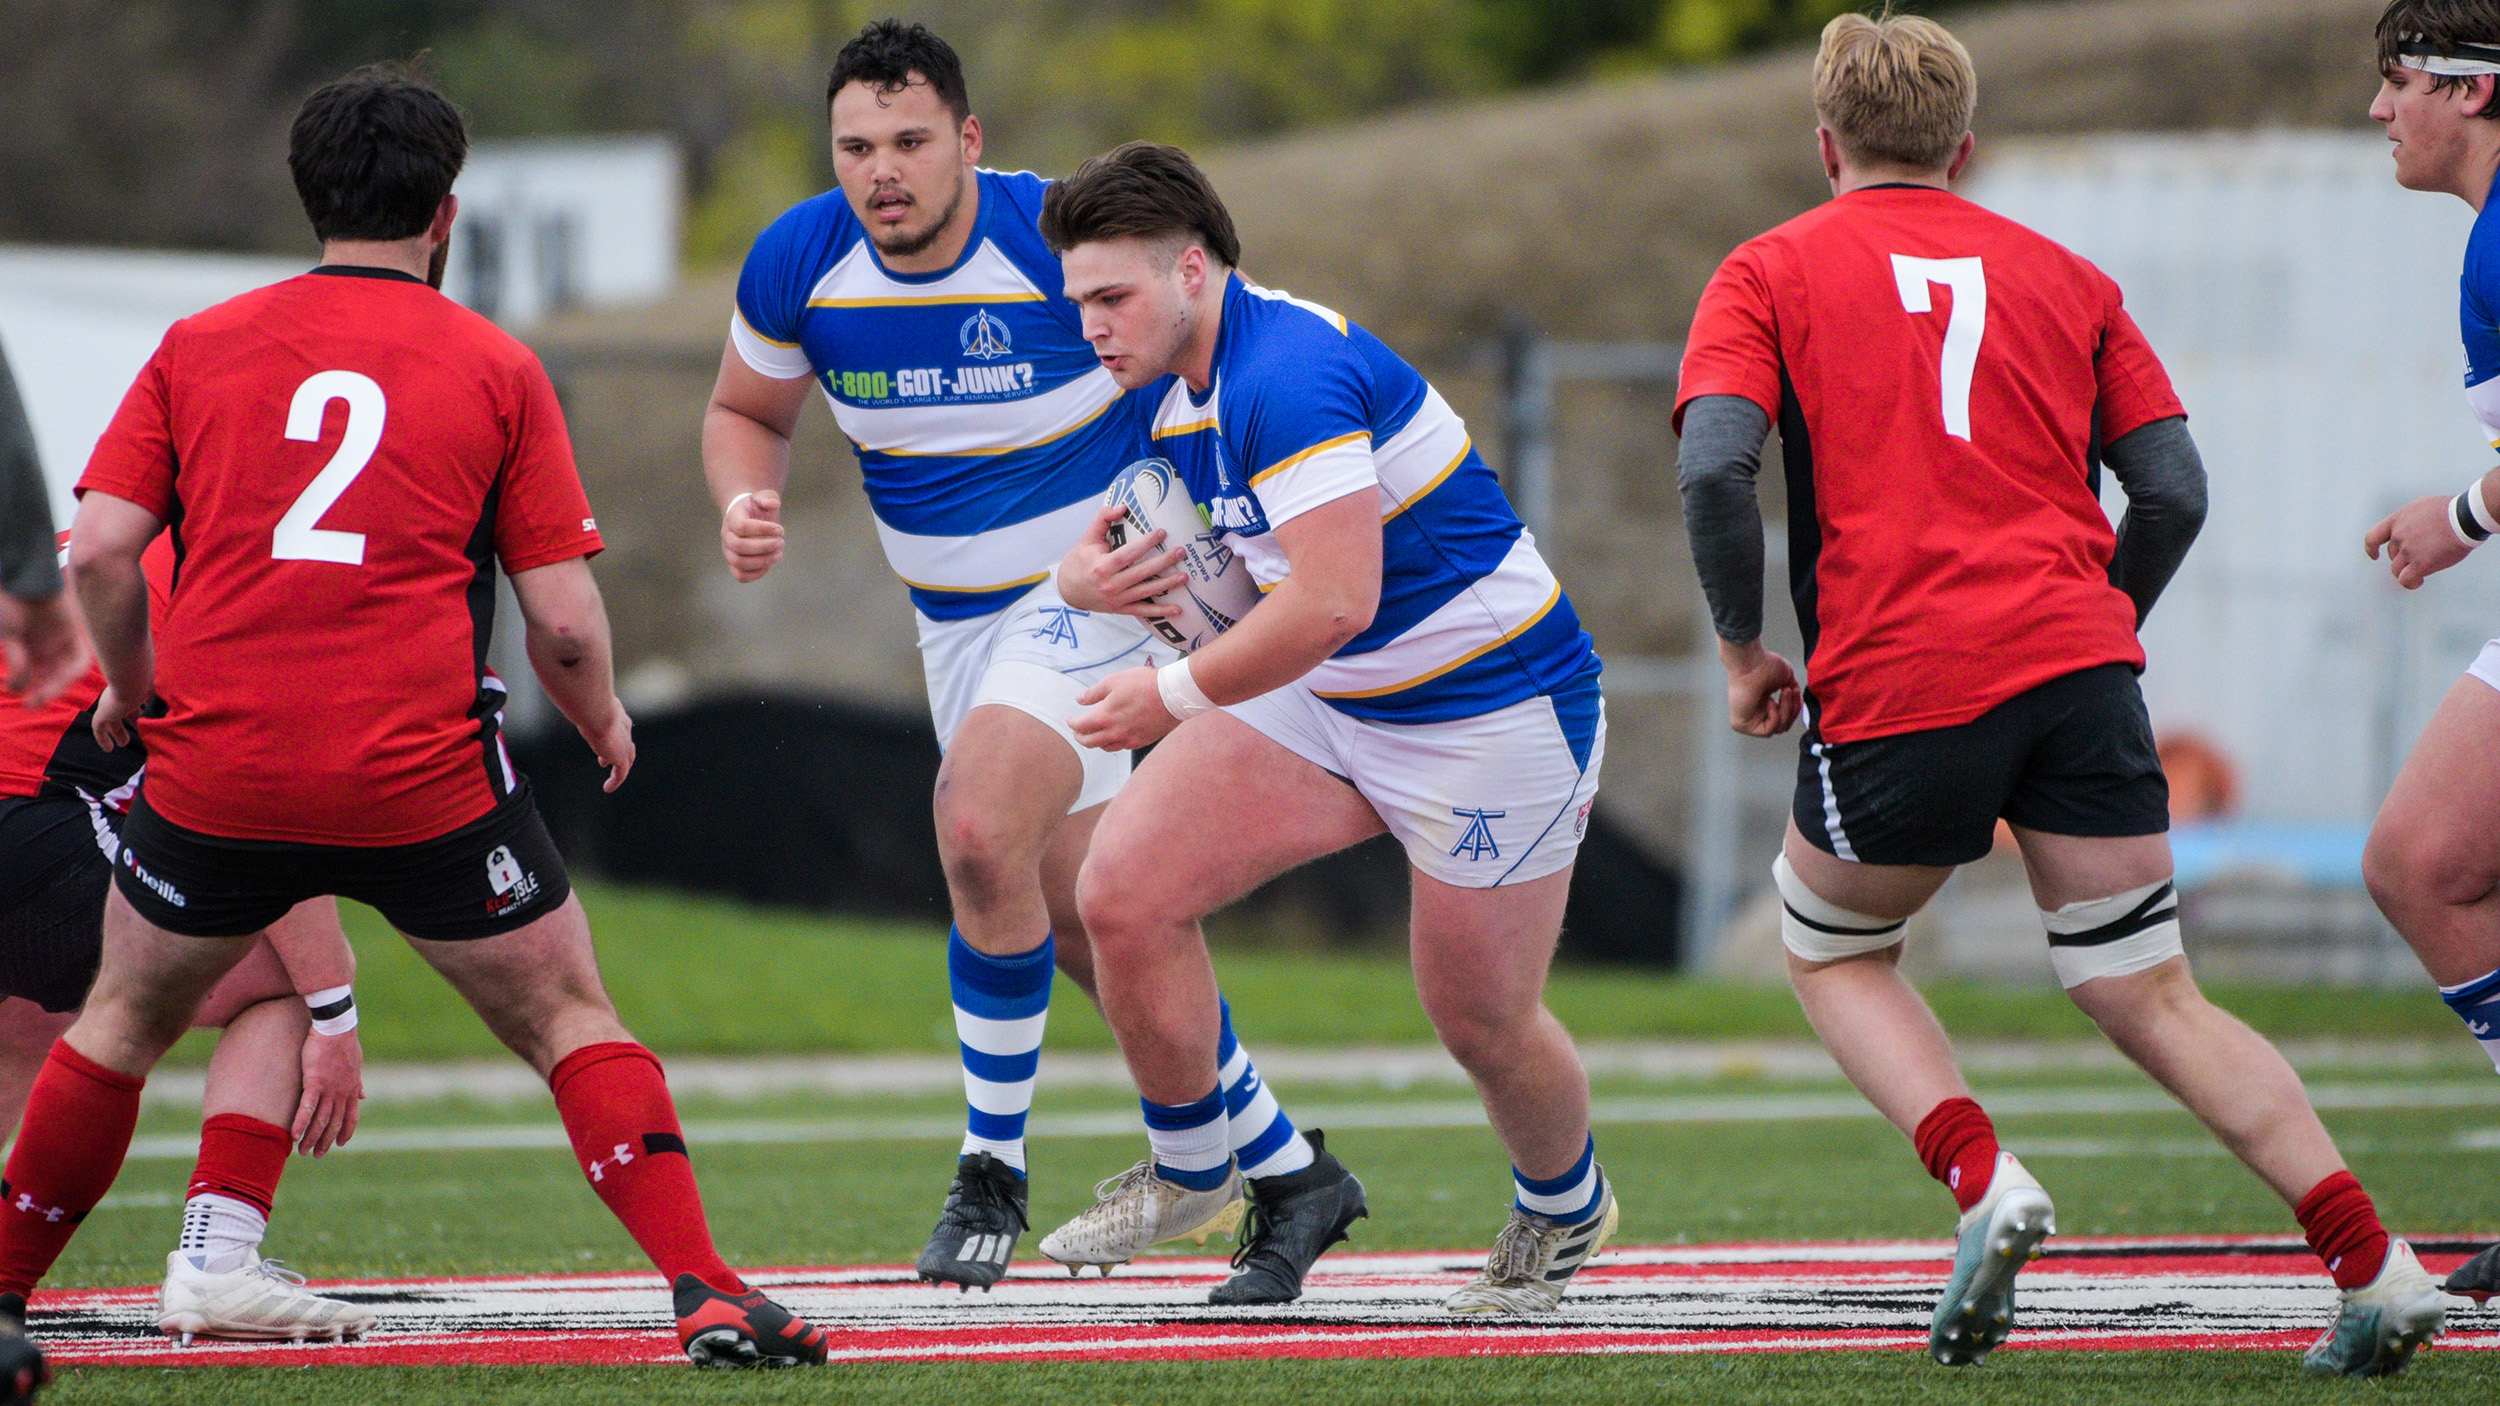 Twelve Arrows Academy Players Named to Canada U20 Touring Roster